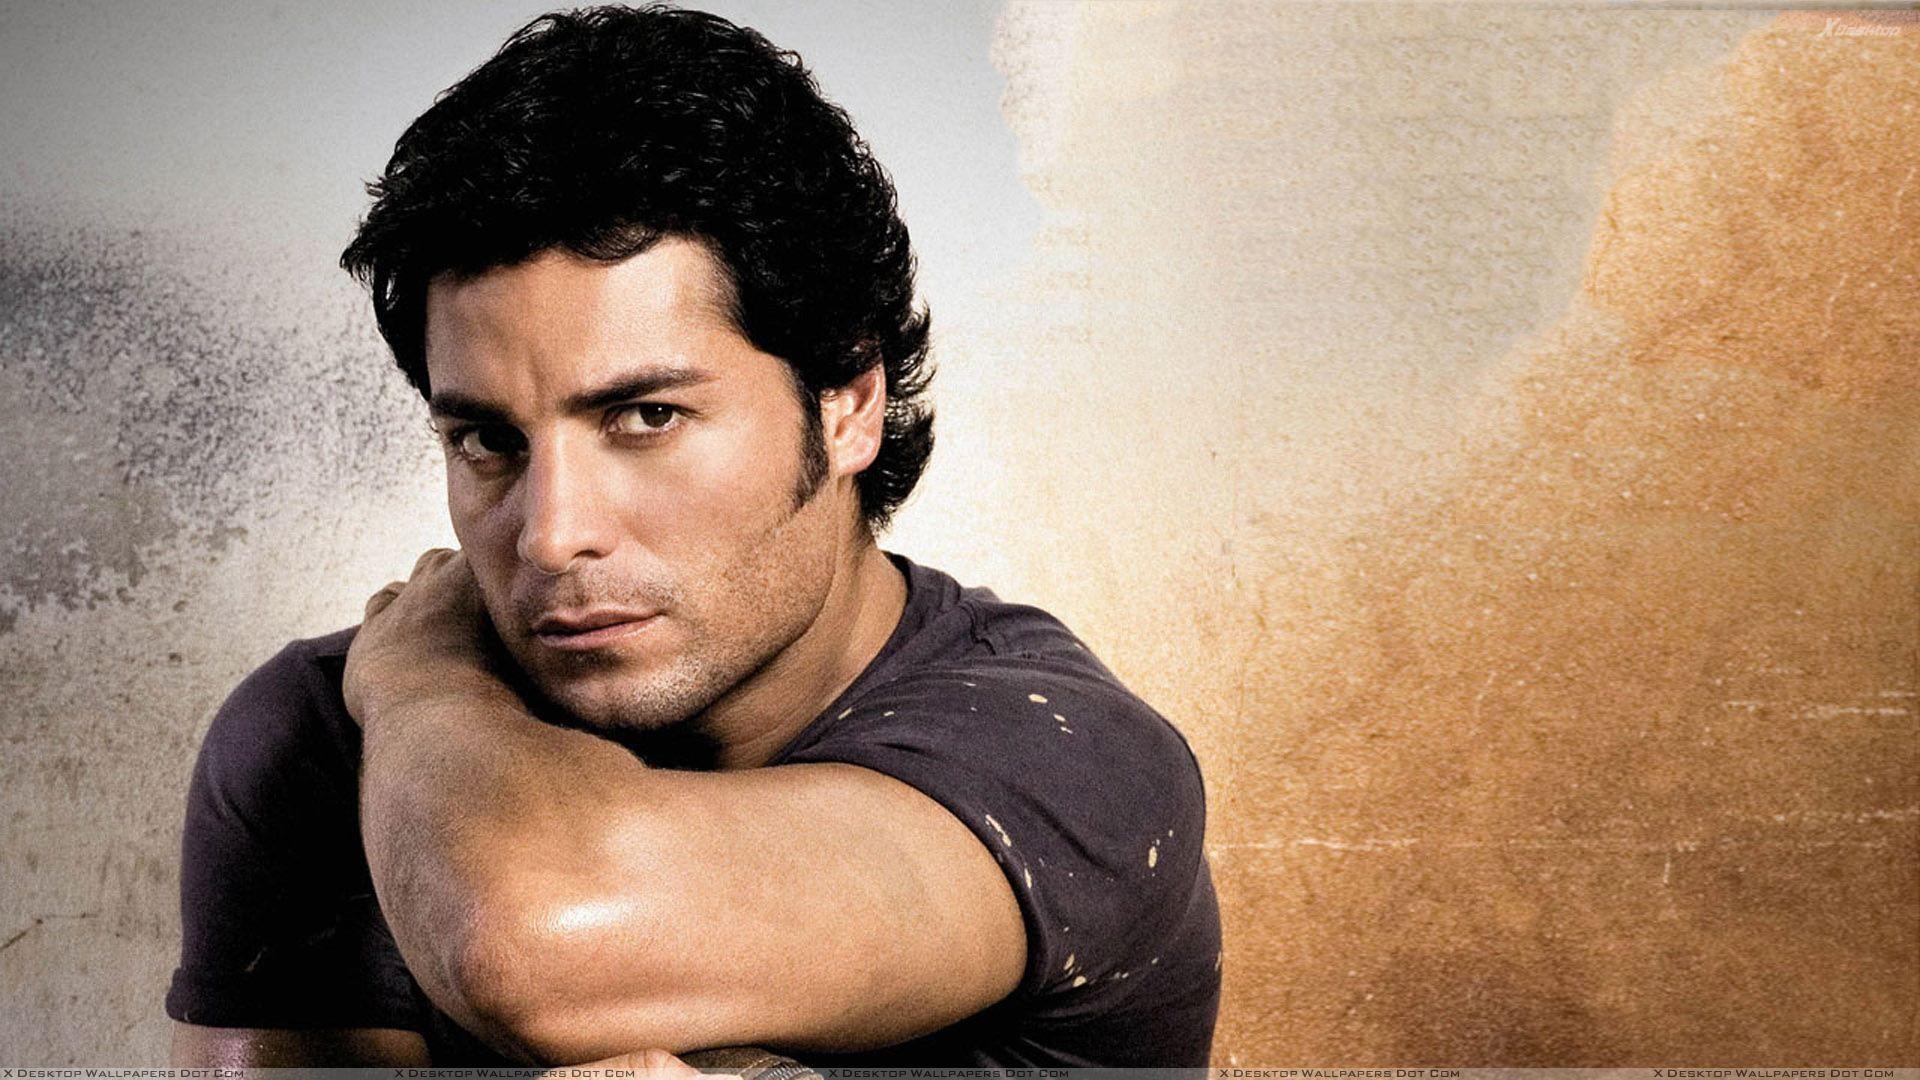 Chayanne Wallpaper, Photo & Image in HD